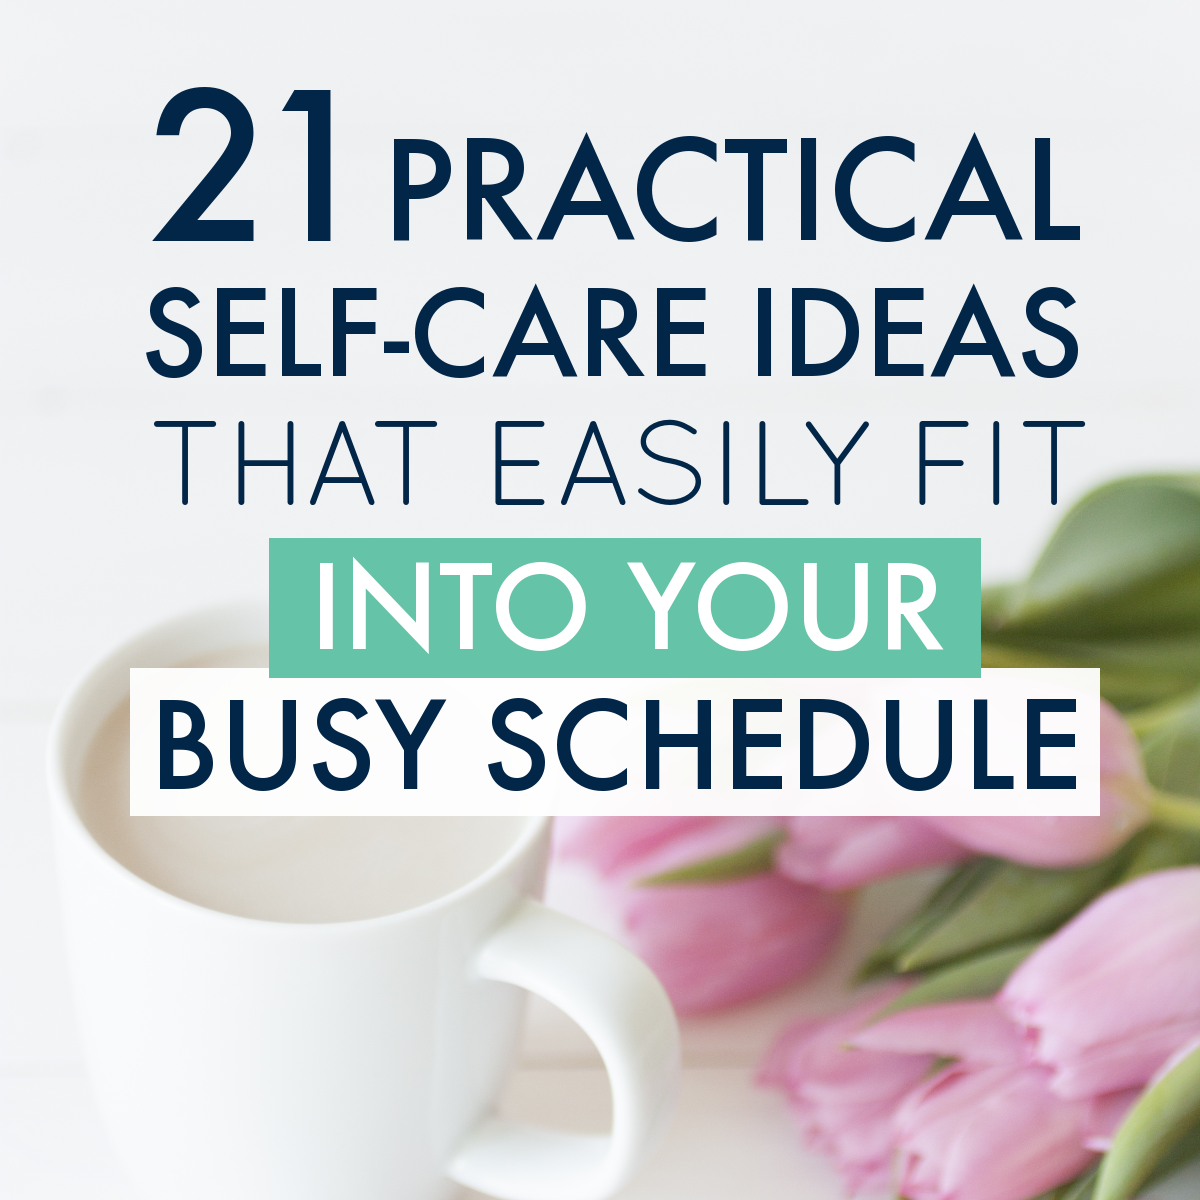 21 Practical Self-Care Ideas that Easily Fit into Your Busy Schedule